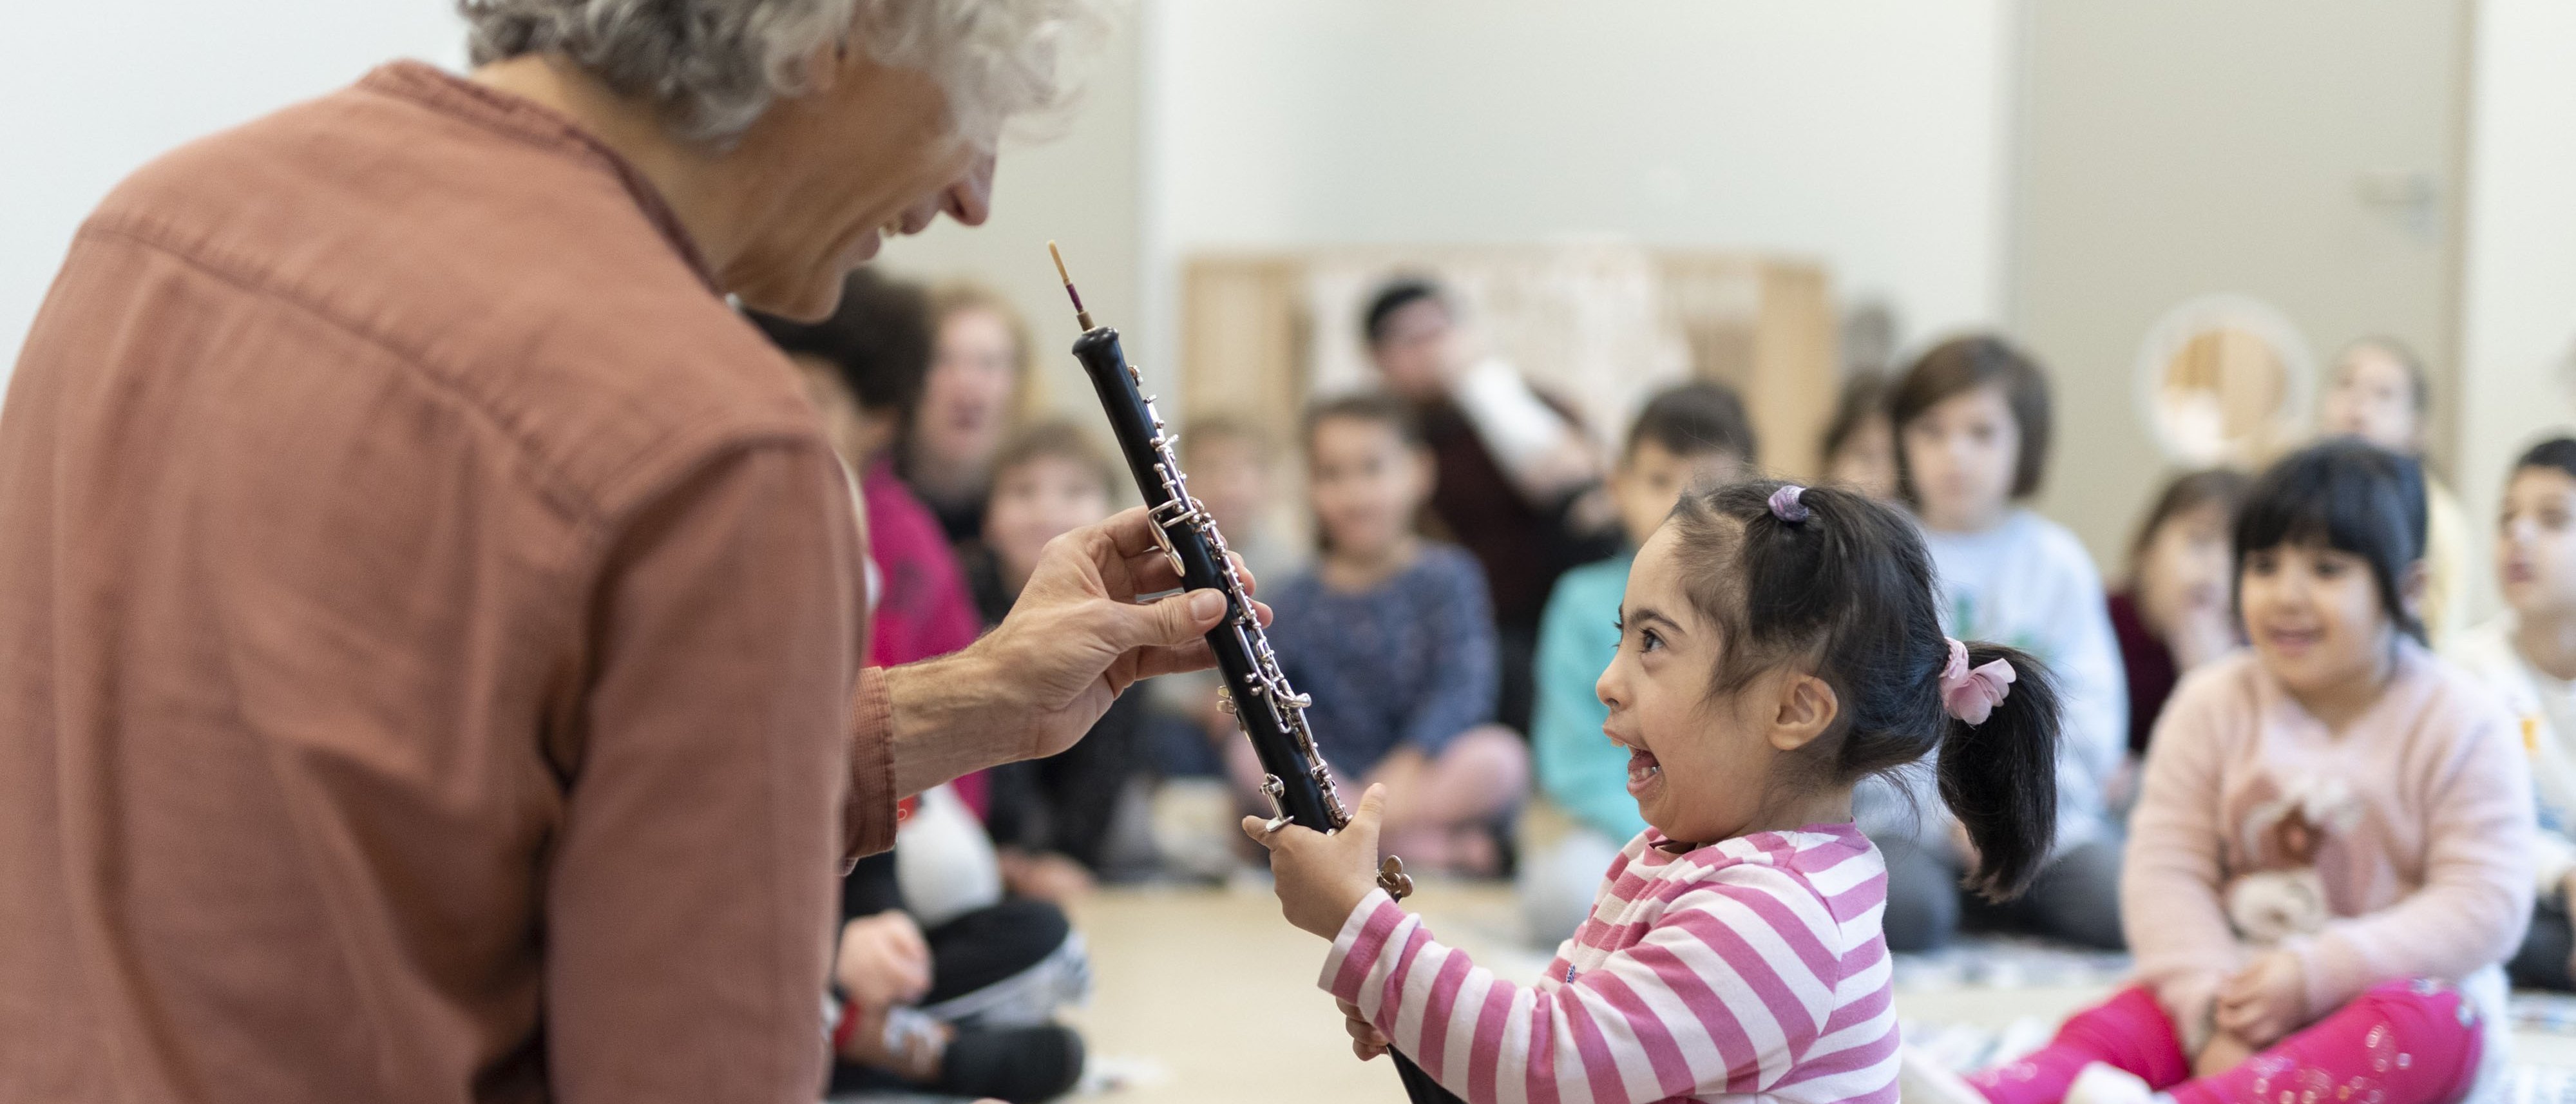 Musician shows small child an oboe